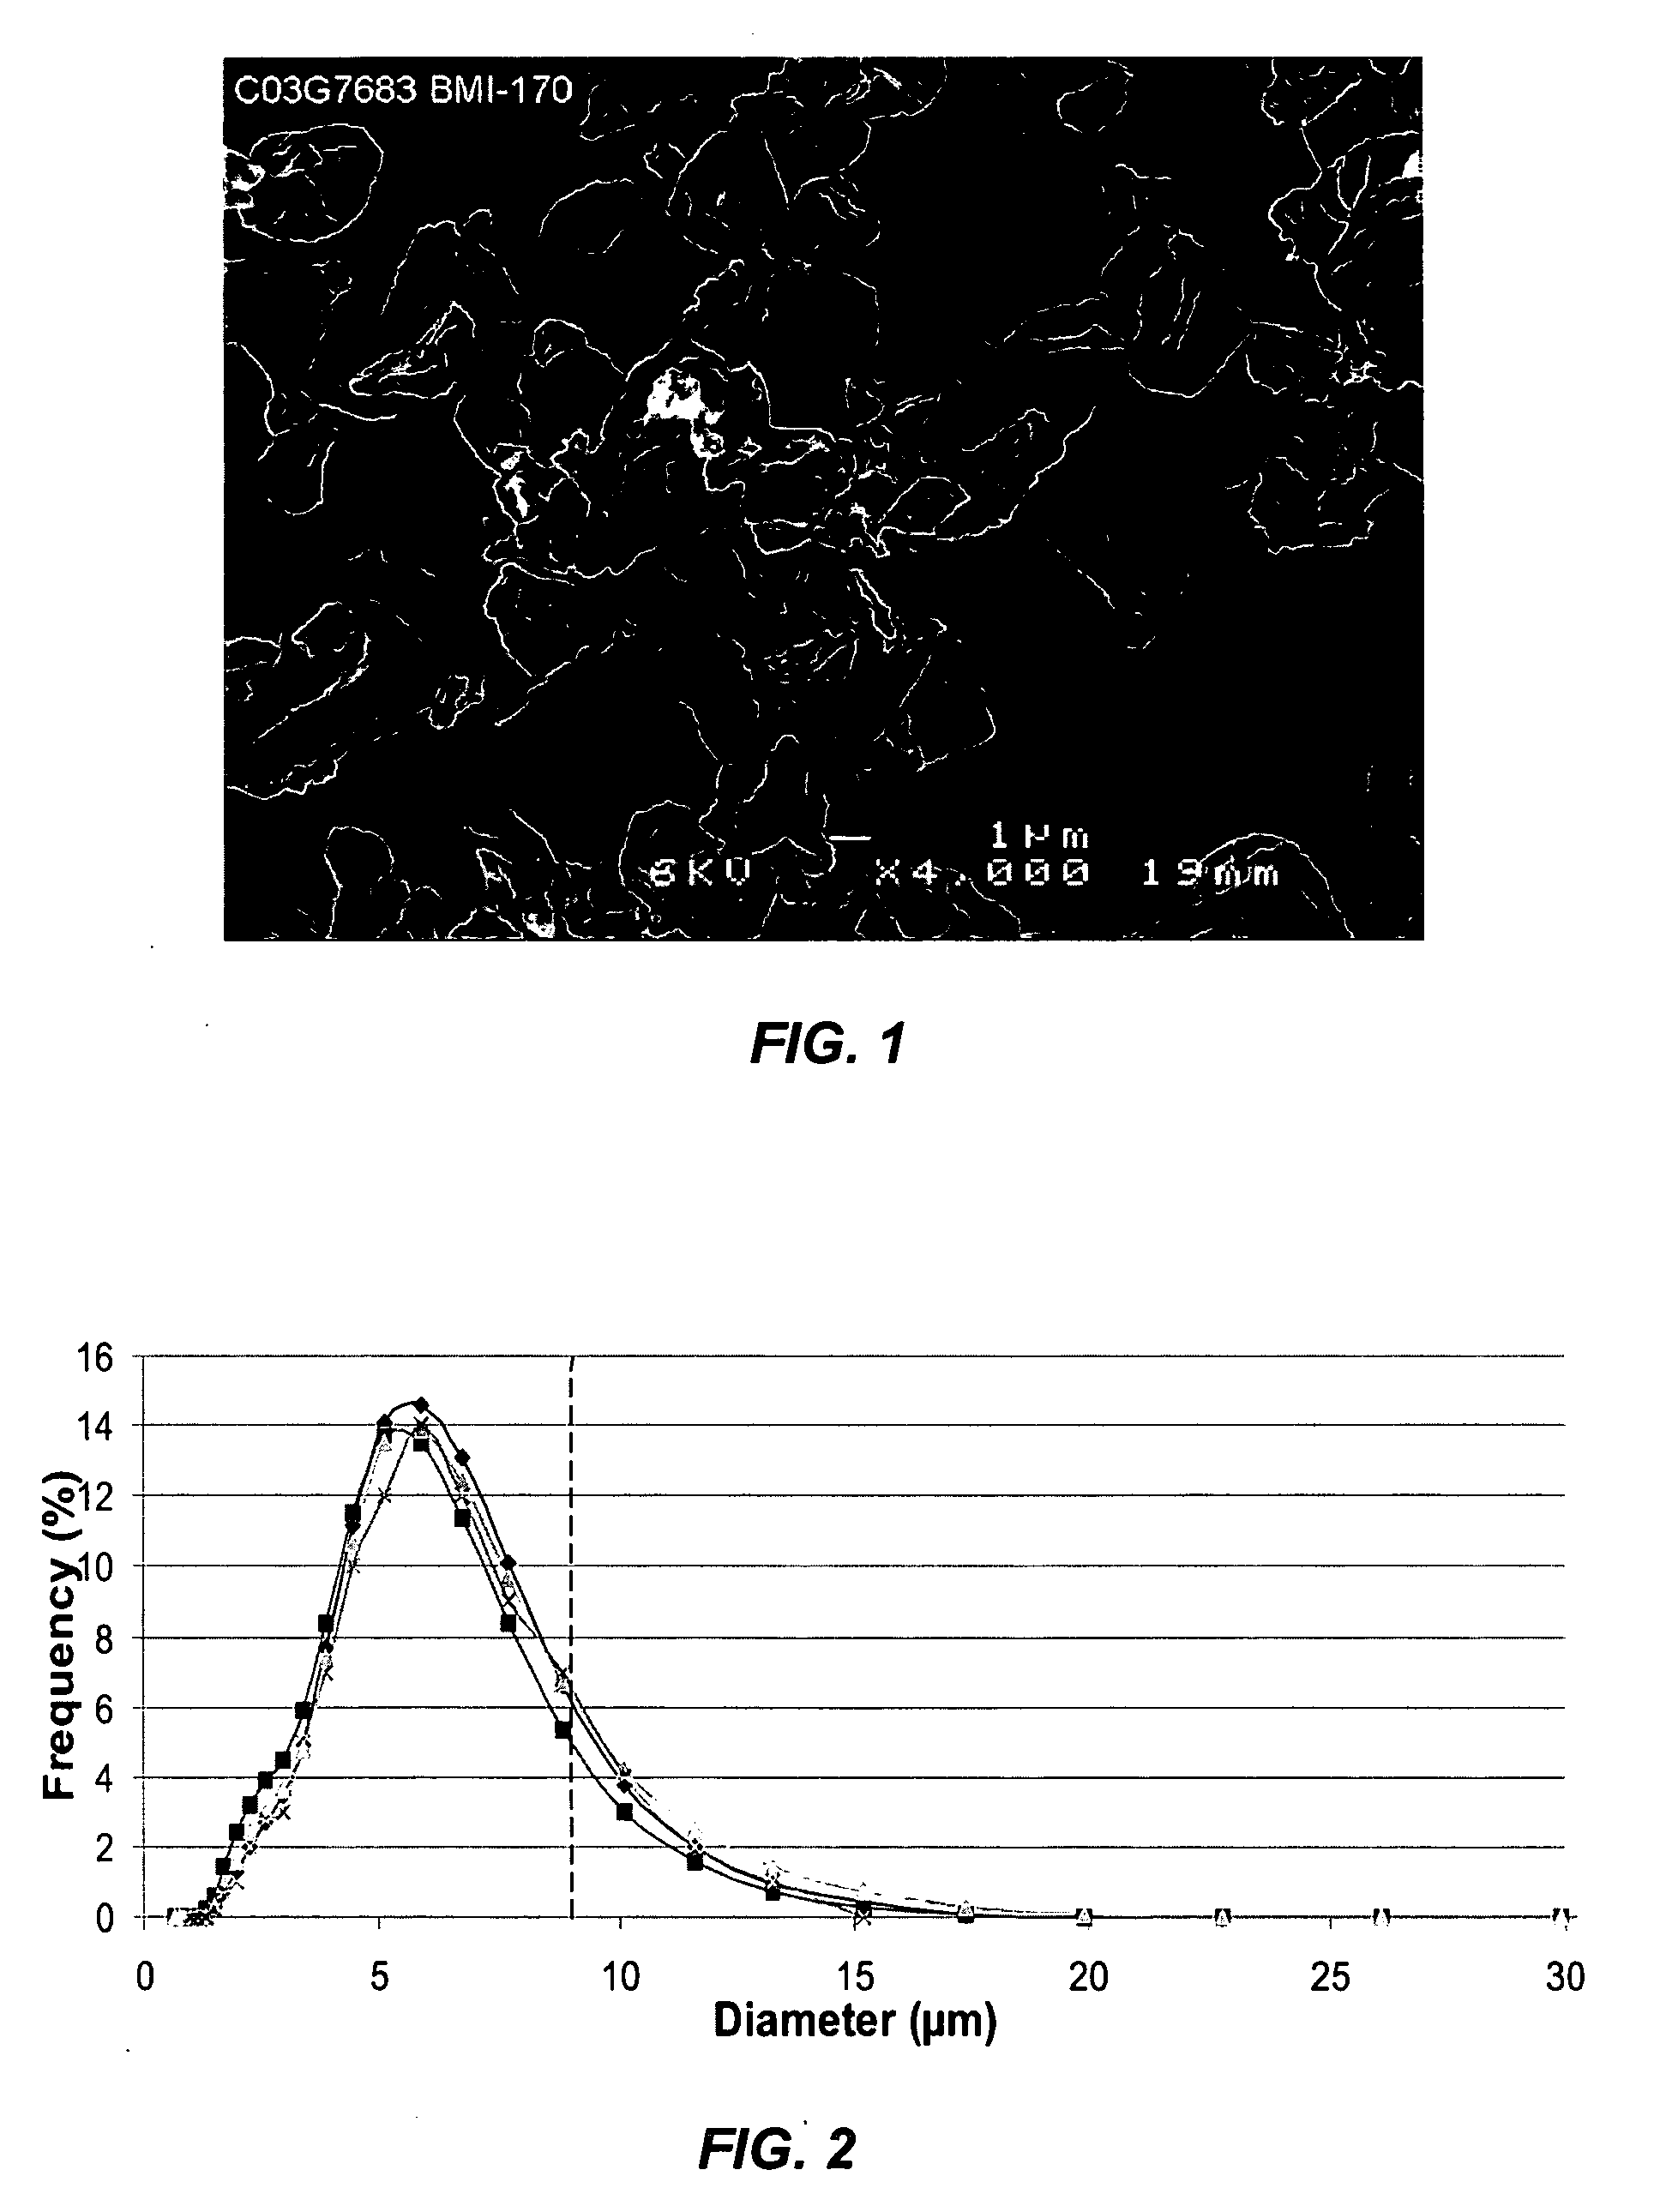 Implantable device for continuous delivery of interferon